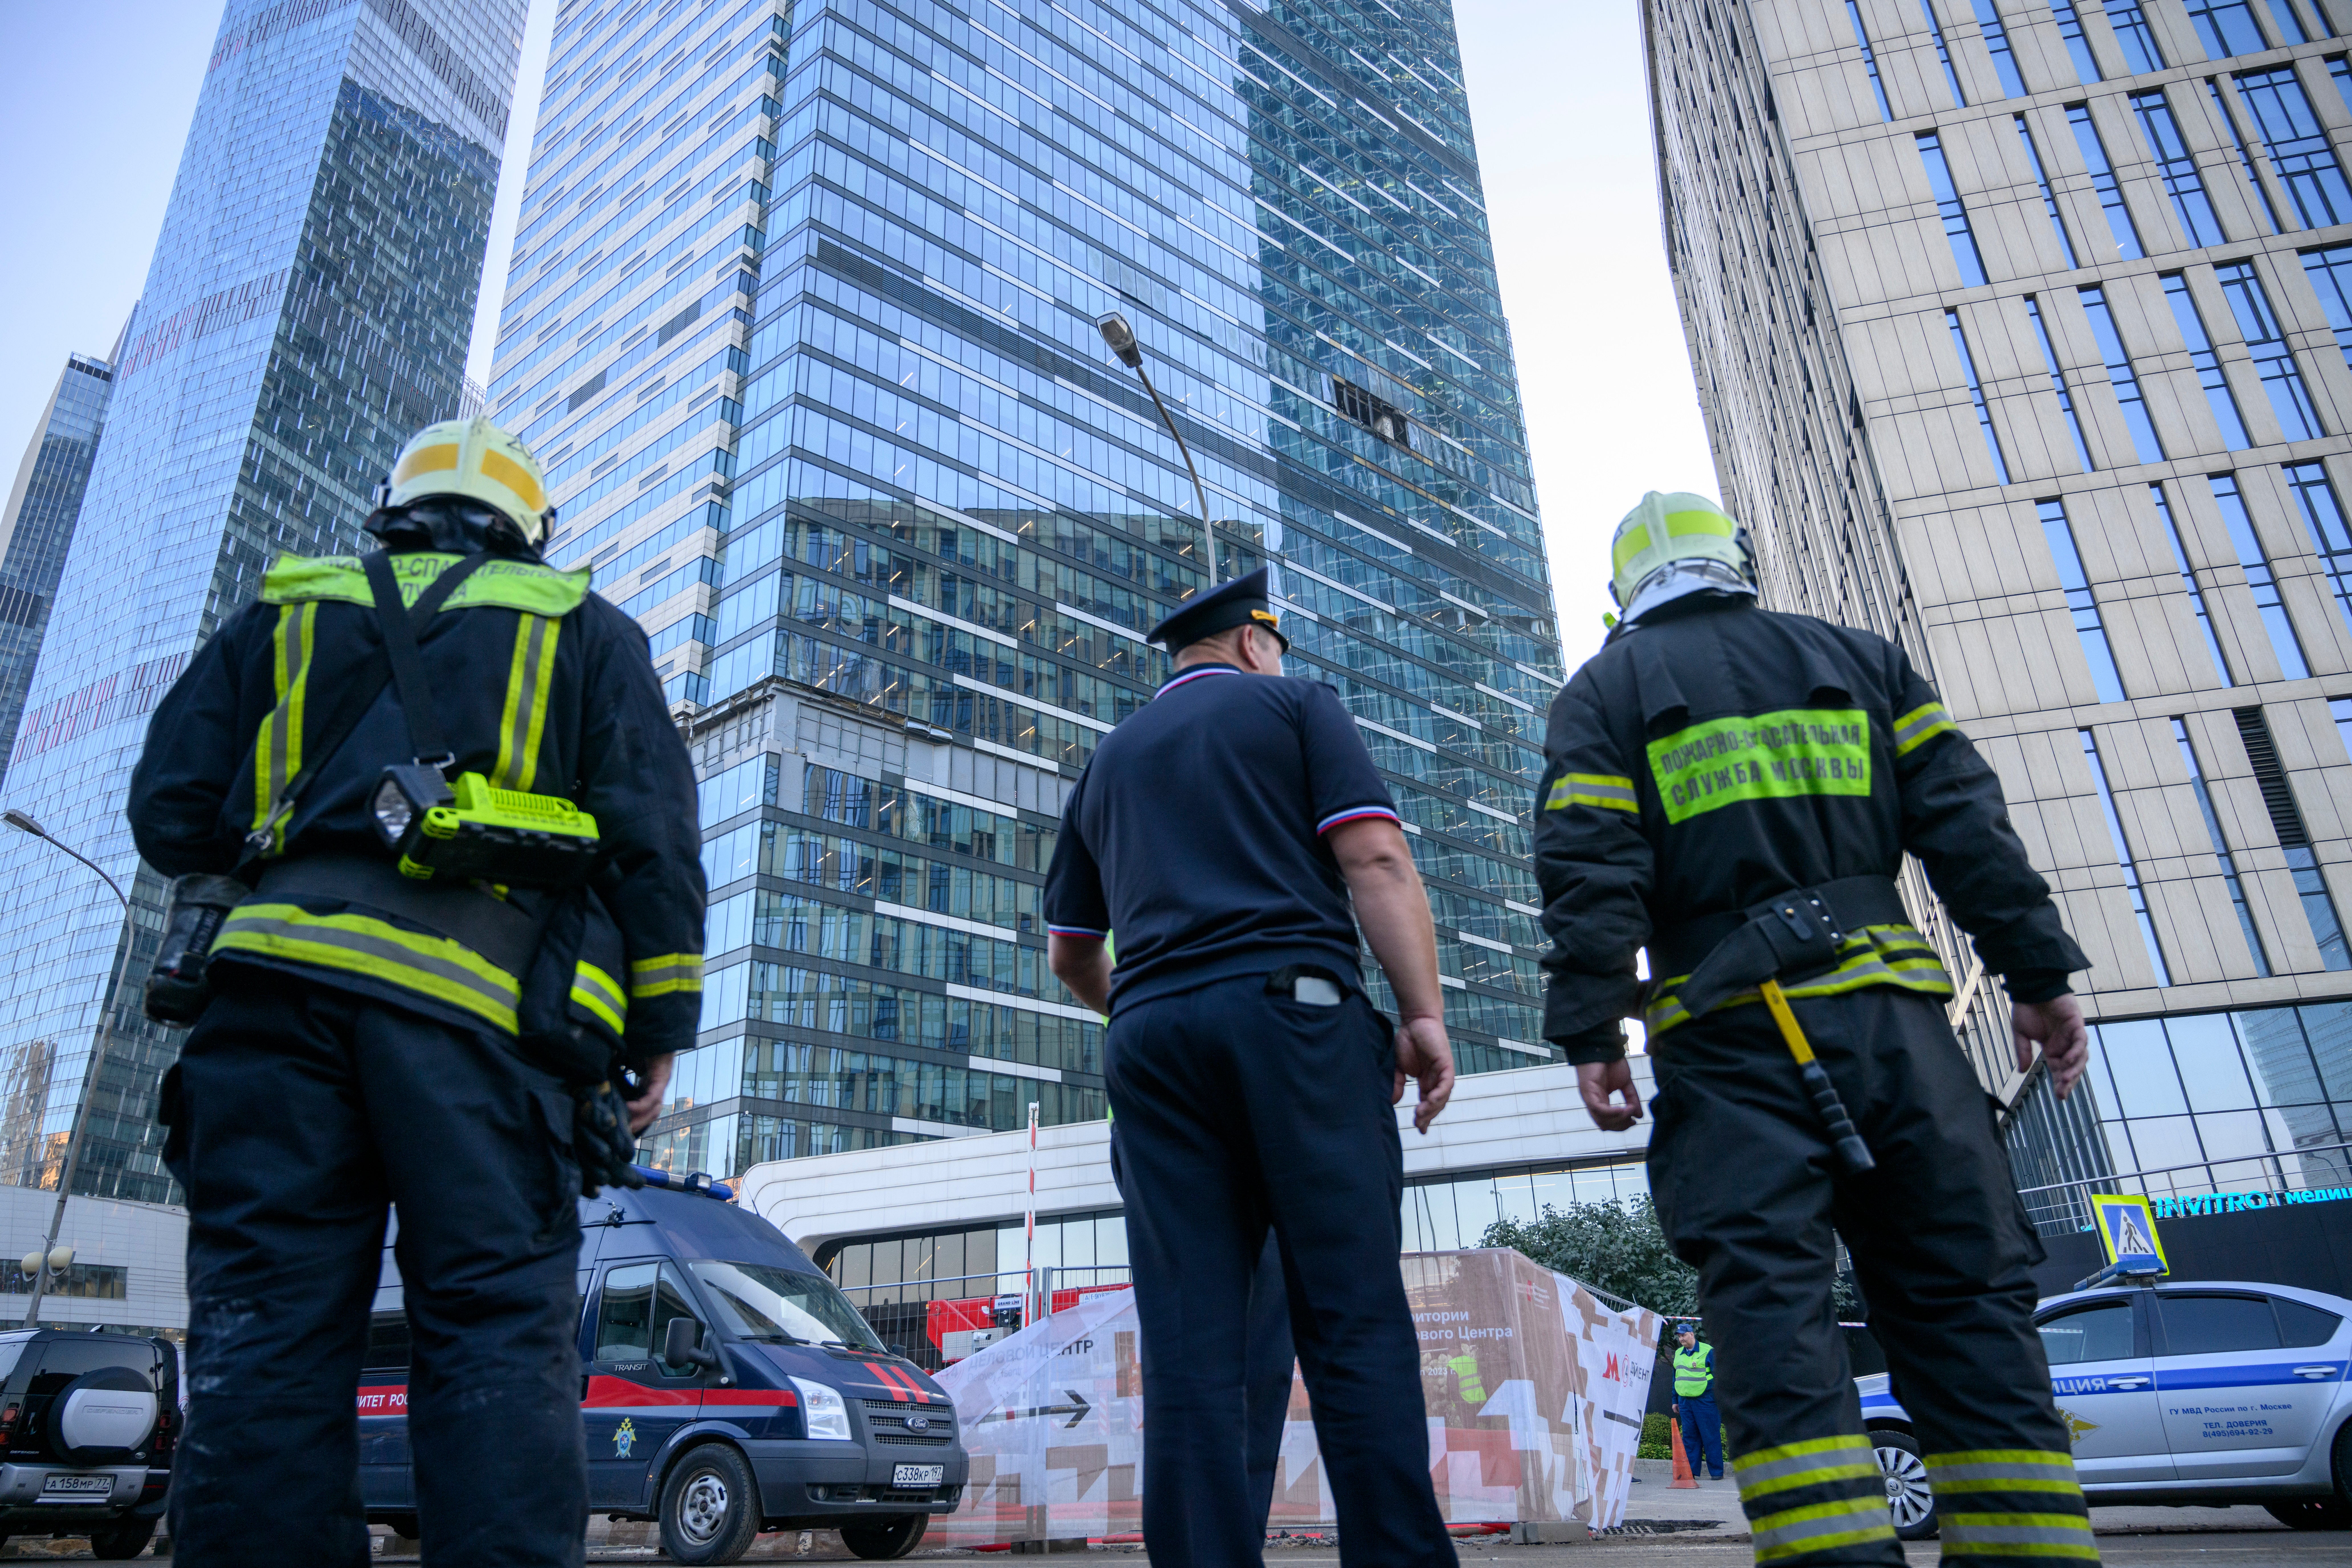 Russian emergency services outside the damaged building on Tuesday